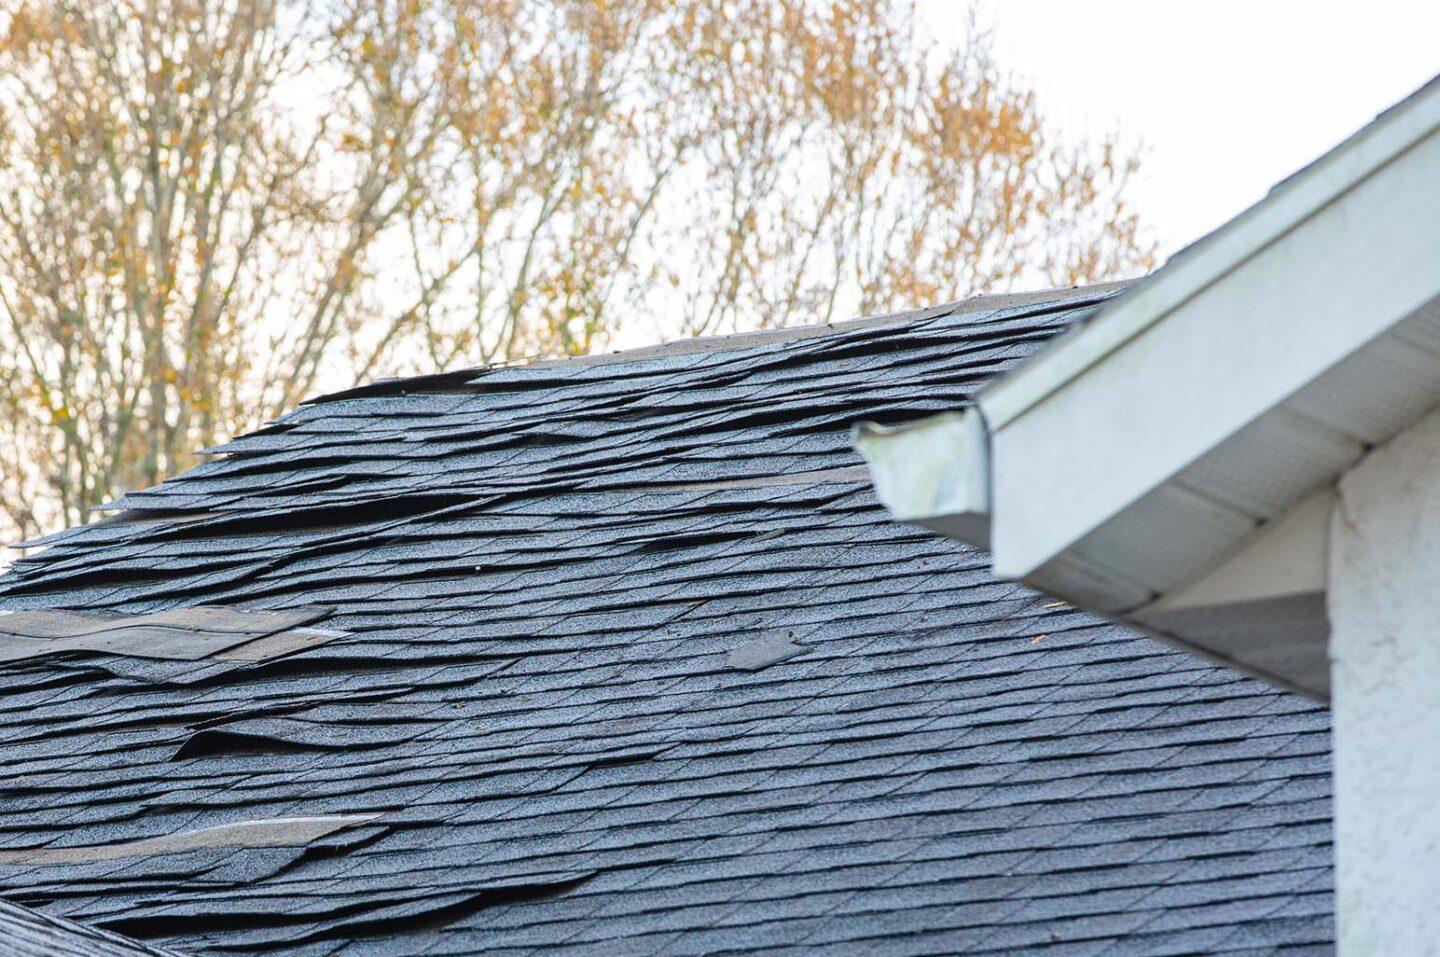 Why Timely Roof Damage Detection is Crucial for Homeowners